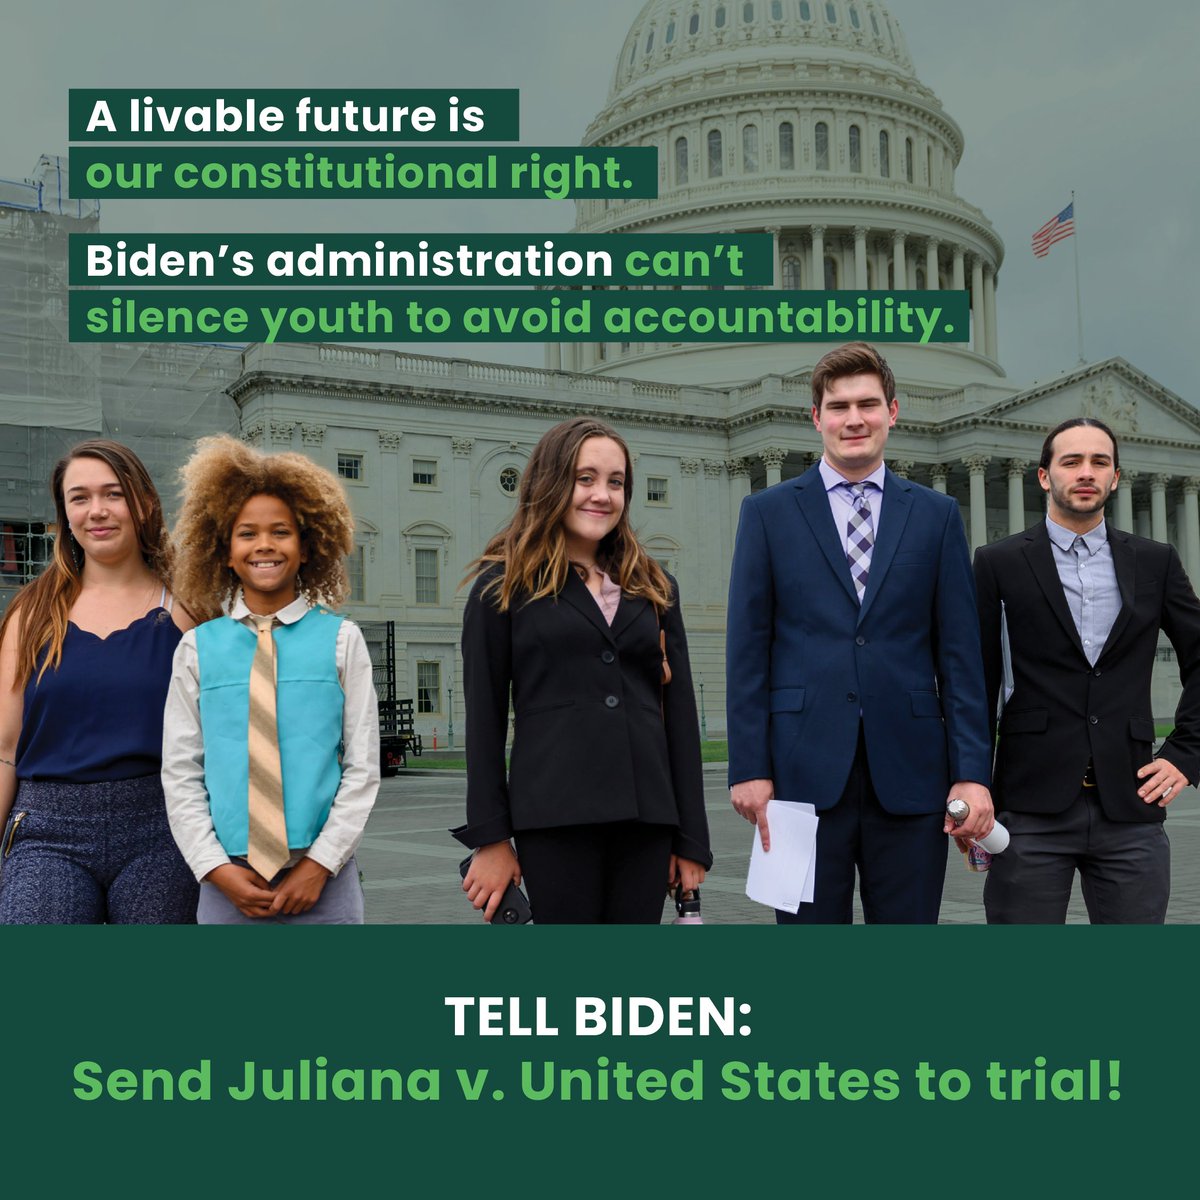 A SAFE HEALTHY #CLIMATE Is Our Constitutional Right!

Join youth plaintiffs w/Juliana vs US, Held vs MT, Genesis vs EPA & Layla H vs VA working nationwide for a Livable Climate For All.

9yrs on, Juliana's 21 must be heard at trial: bit.ly/SaveJuliana
#youthvgov #SaveJuliana